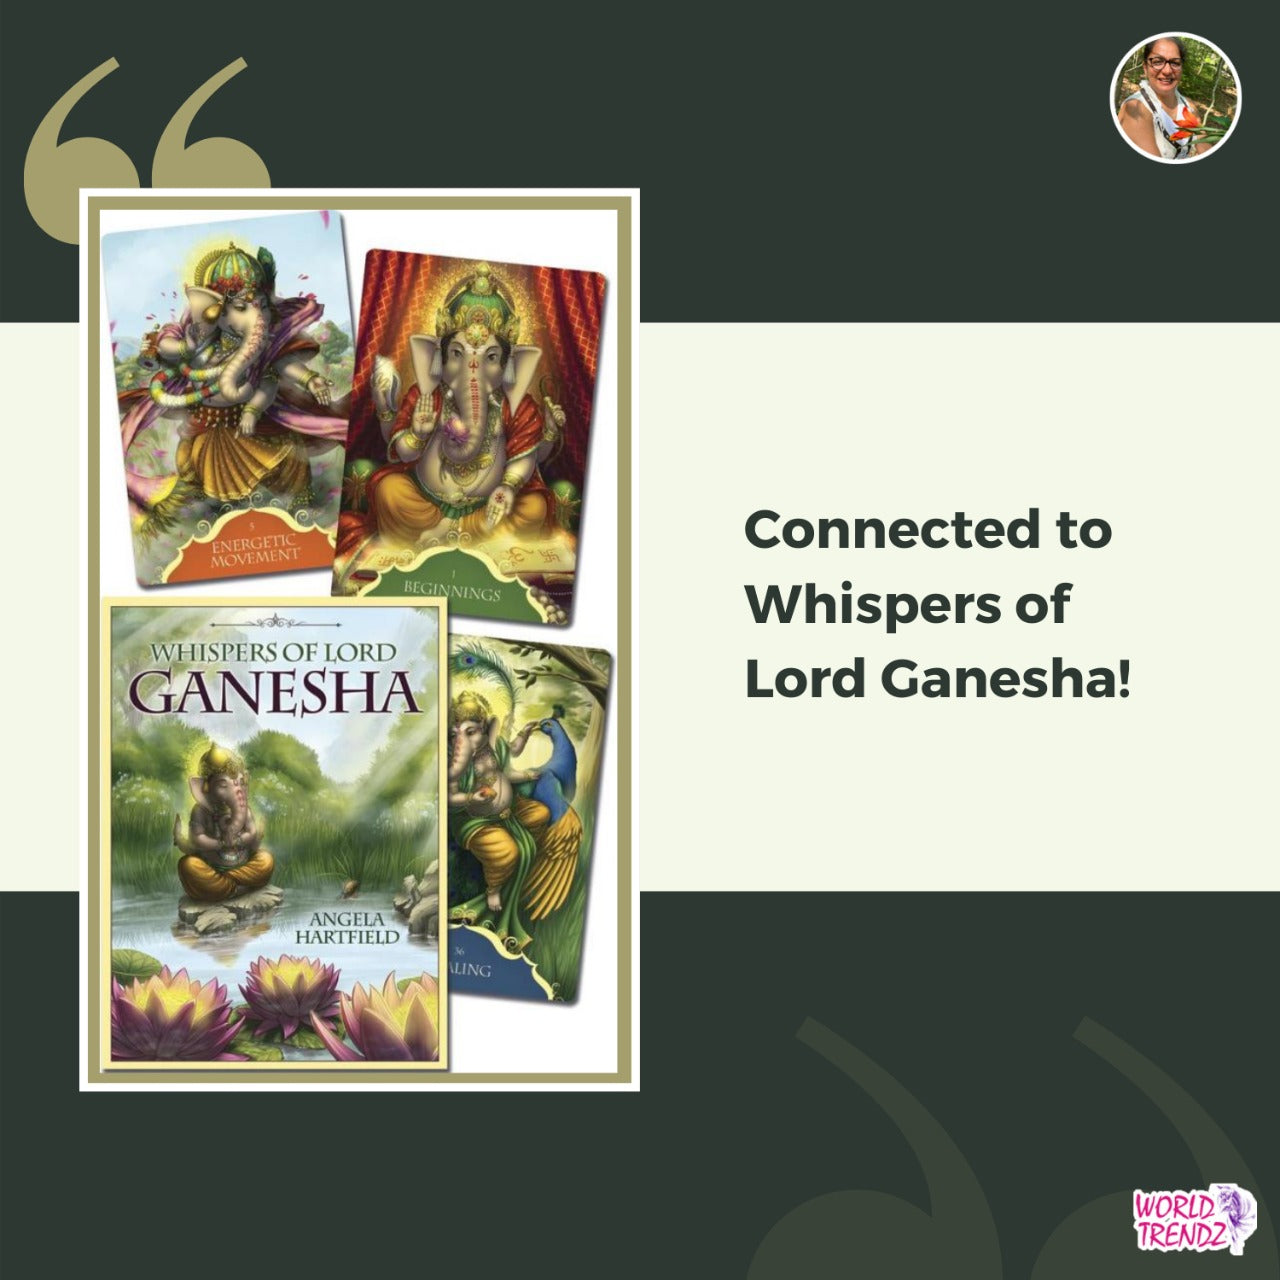 Connected to Whispers of Lord Ganesha